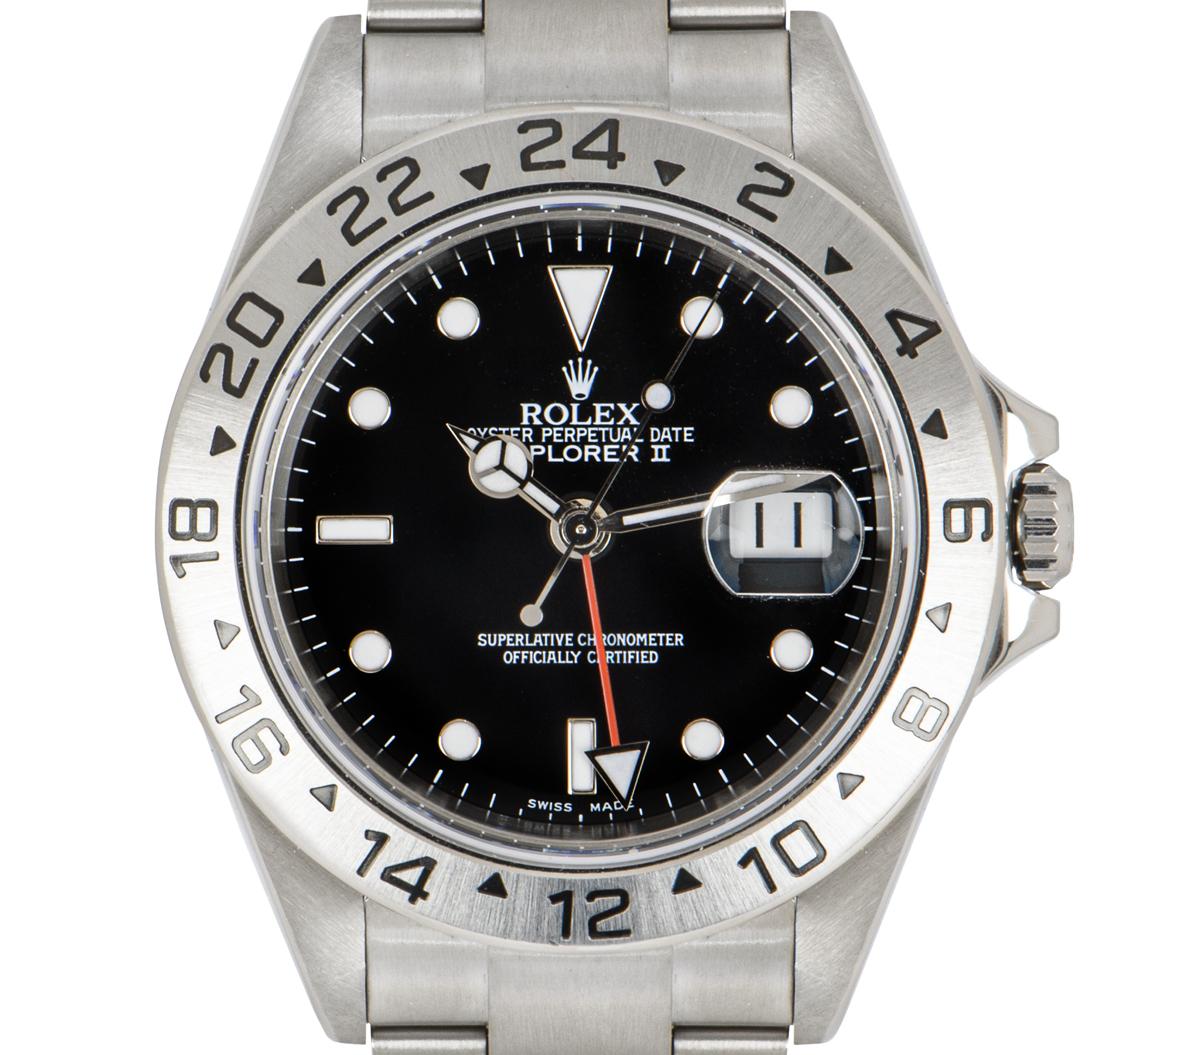 A stainless steel Explorer II by Rolex. Featuring a black dial with a date aperture and a red 24 hour hand. Complementing the dial is a stainless steel fixed bezel with a 24 hour display. Equipped with an Oyster bracelet and an Oysterlock deployant